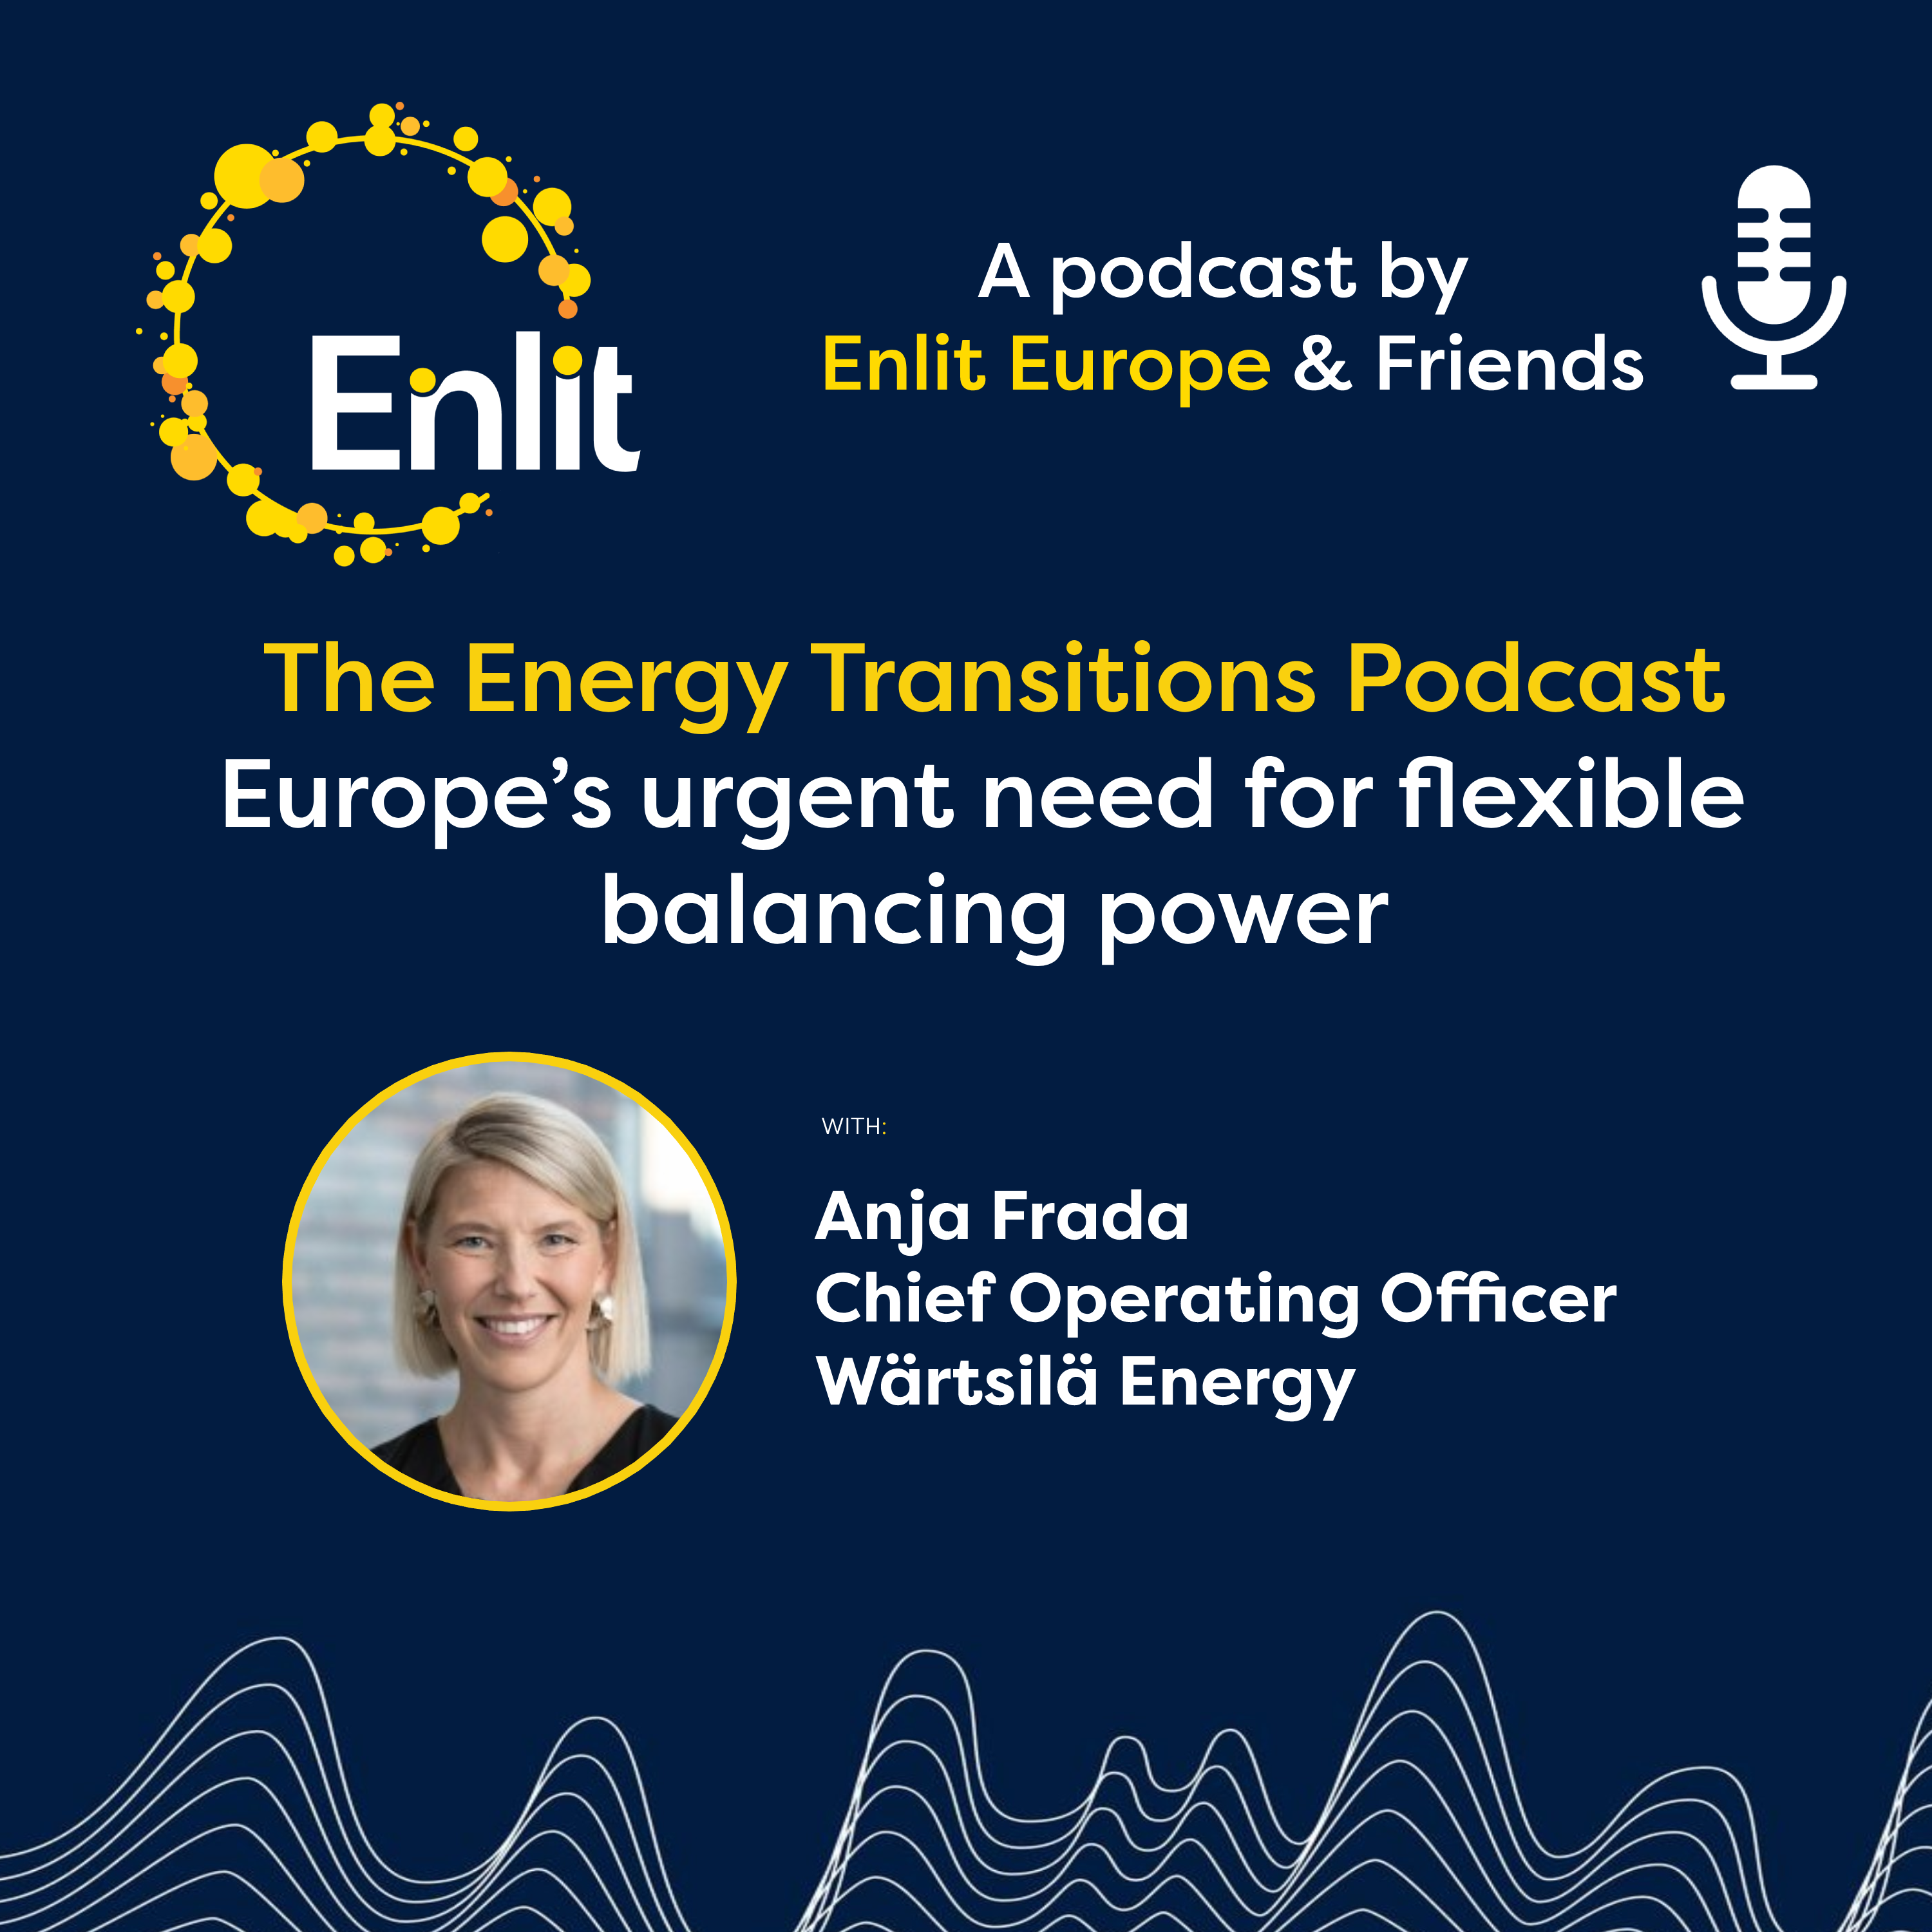 Europe’s urgent need for flexible balancing power